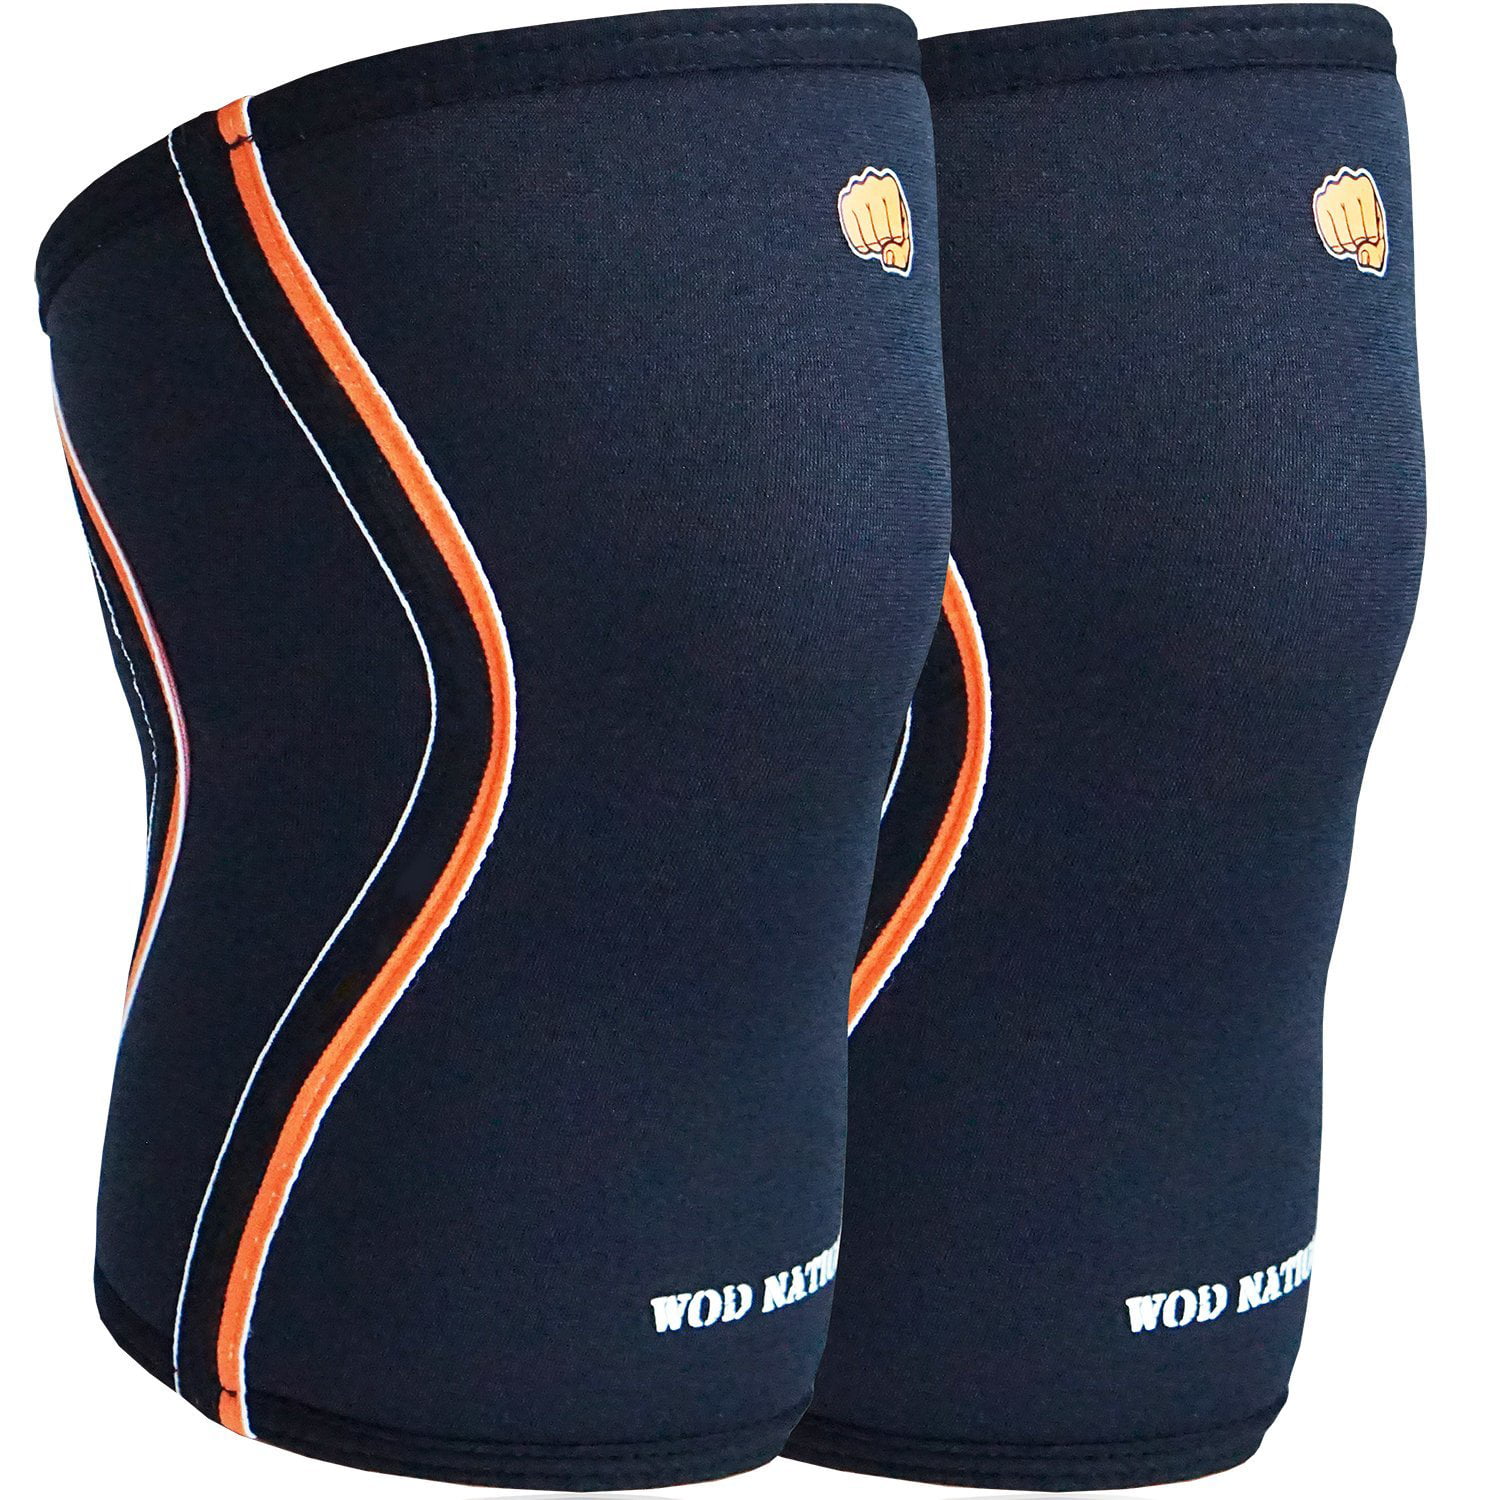 5mm Neoprene Knee Sleeves PAIR Wraps Patella support brace Squats Lunges Gym 